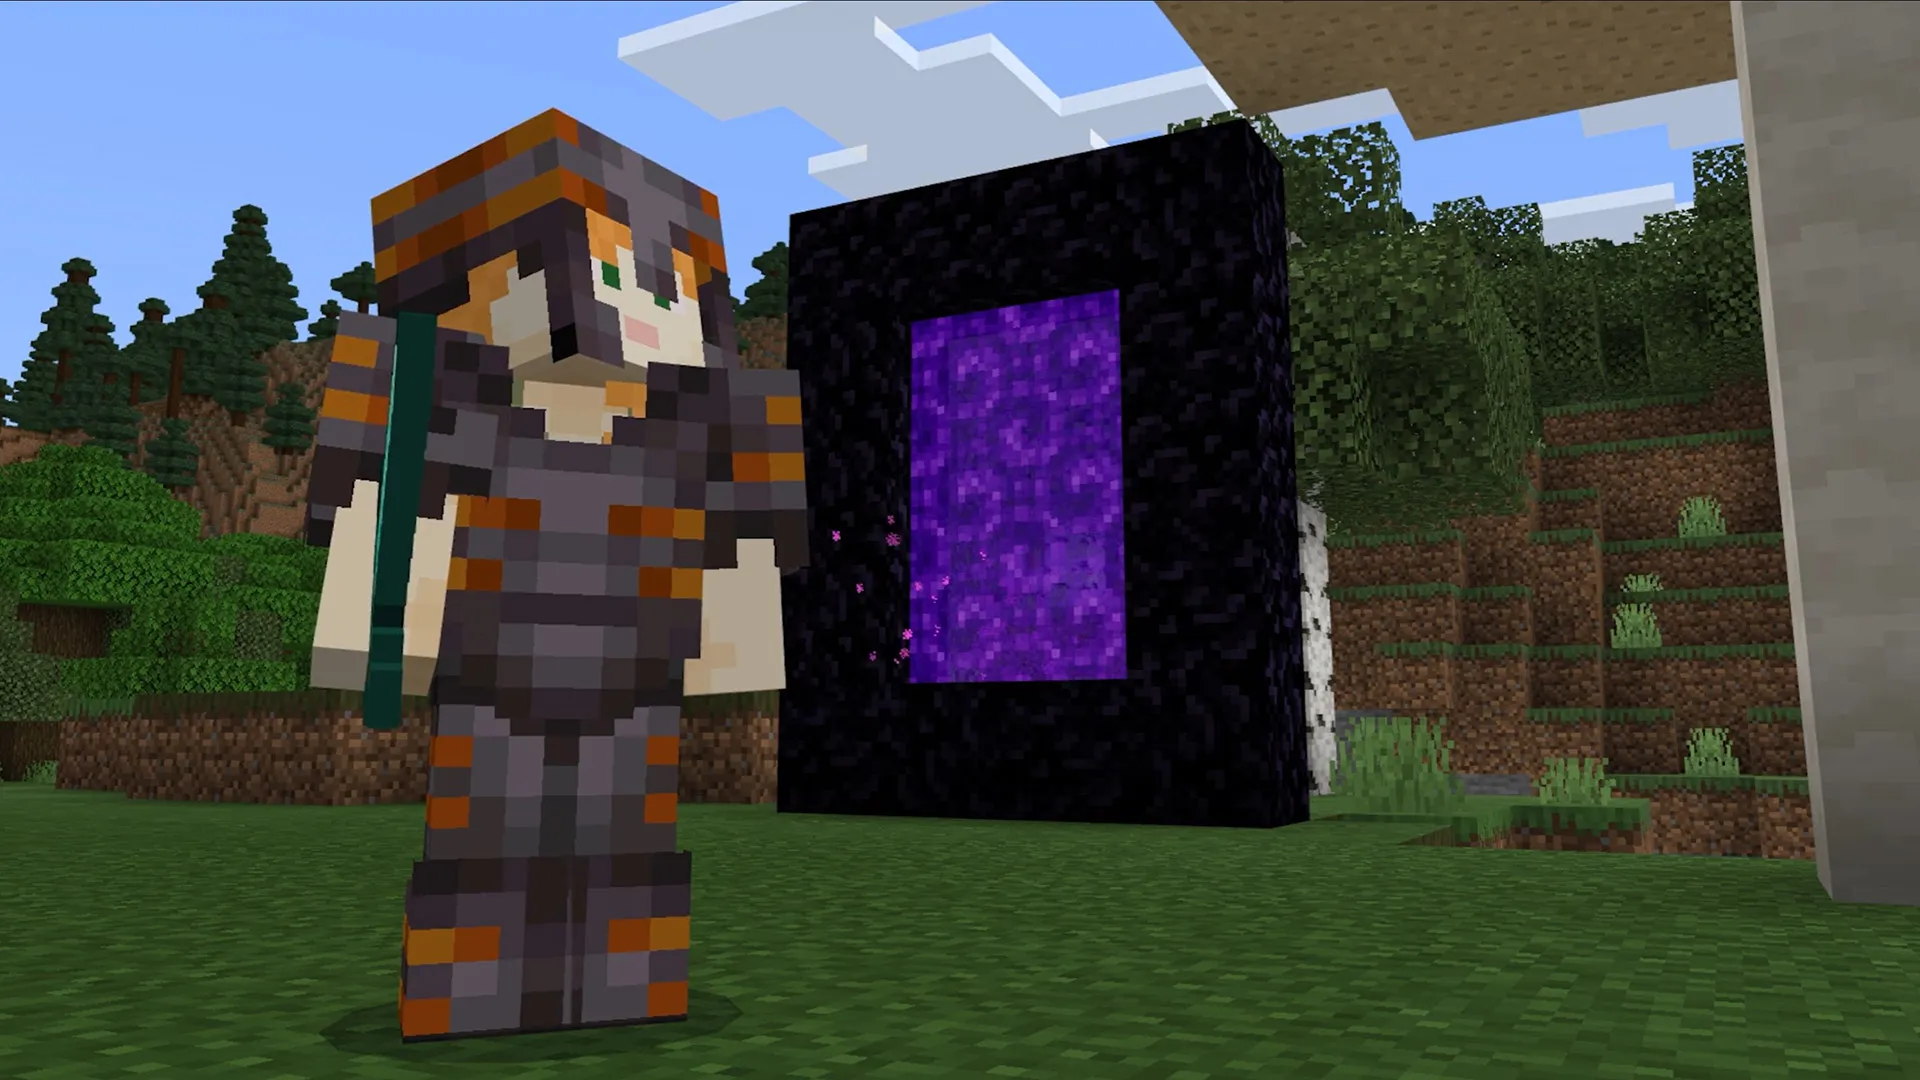 In 2024, it's finally time for me to beat the Ender Dragon in